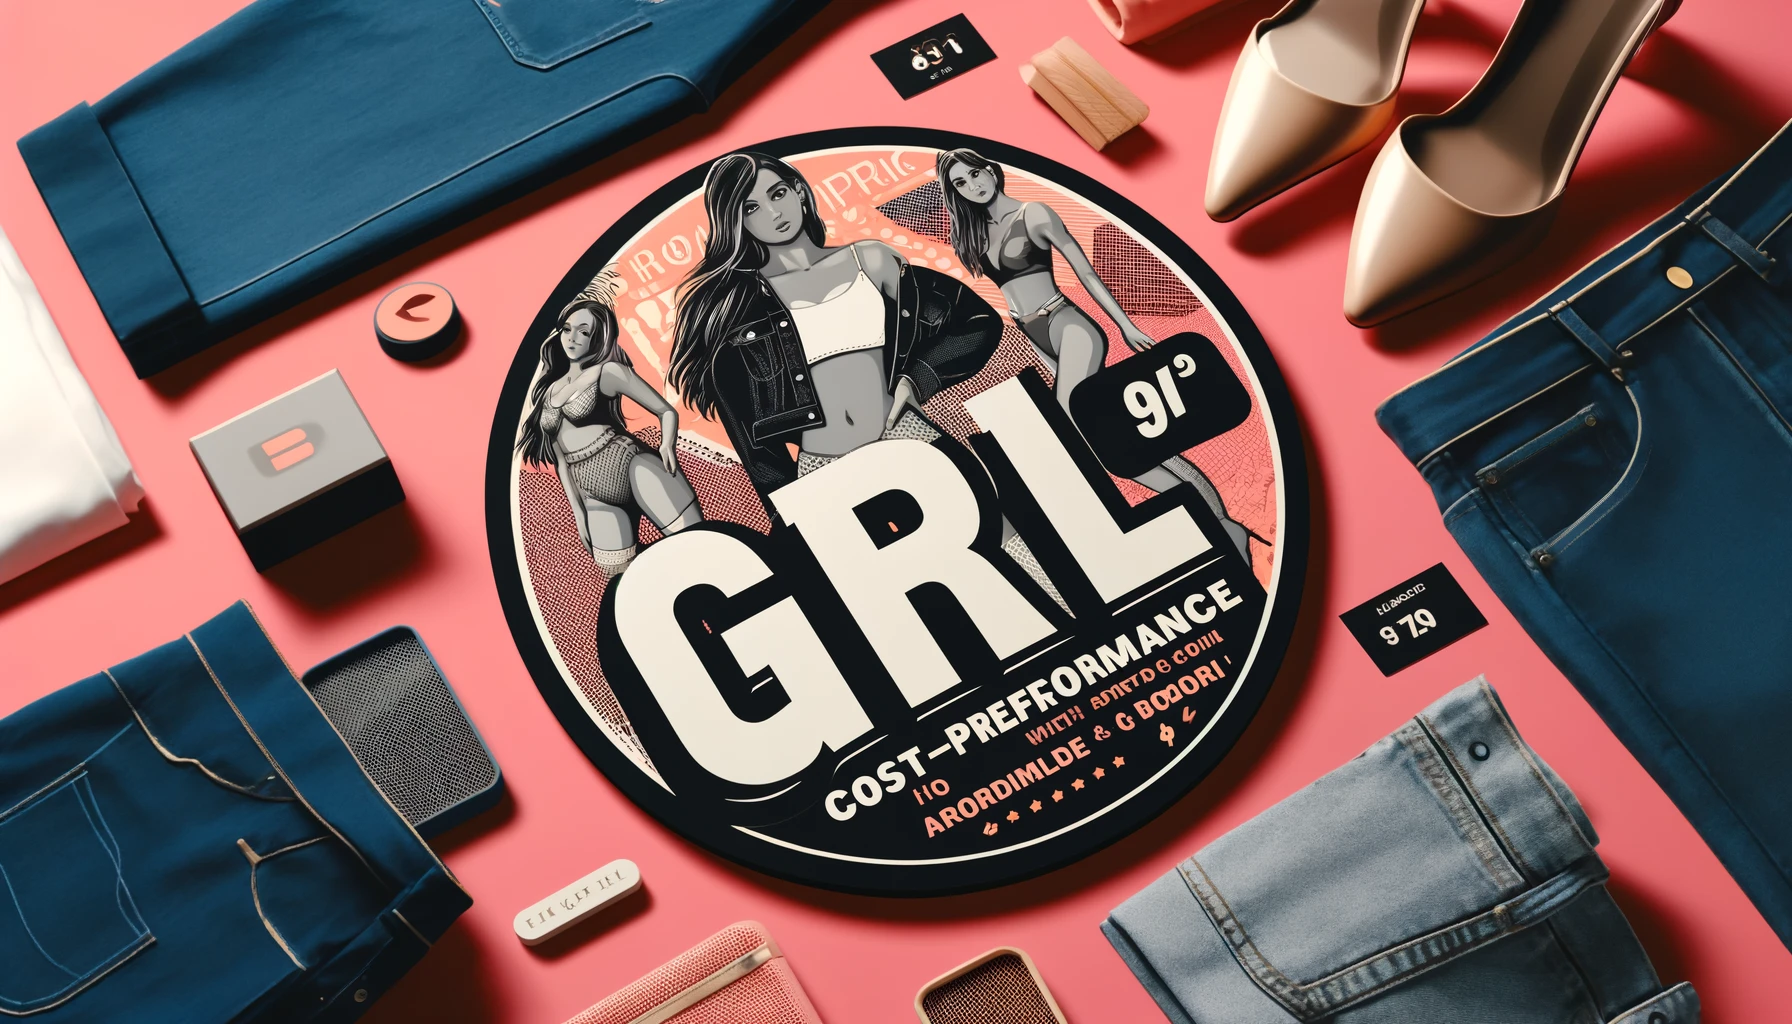 A stylish layout for a fashion brand named 'GRL' with a focus on cost-performance (コスパ). The image features trendy and affordable clothing items displayed attractively. Incorporate the word 'GRL' prominently in the design. The background should be vibrant and fashionable, reflecting the brand's appeal to young women. The image should be in a 16:9 aspect ratio.